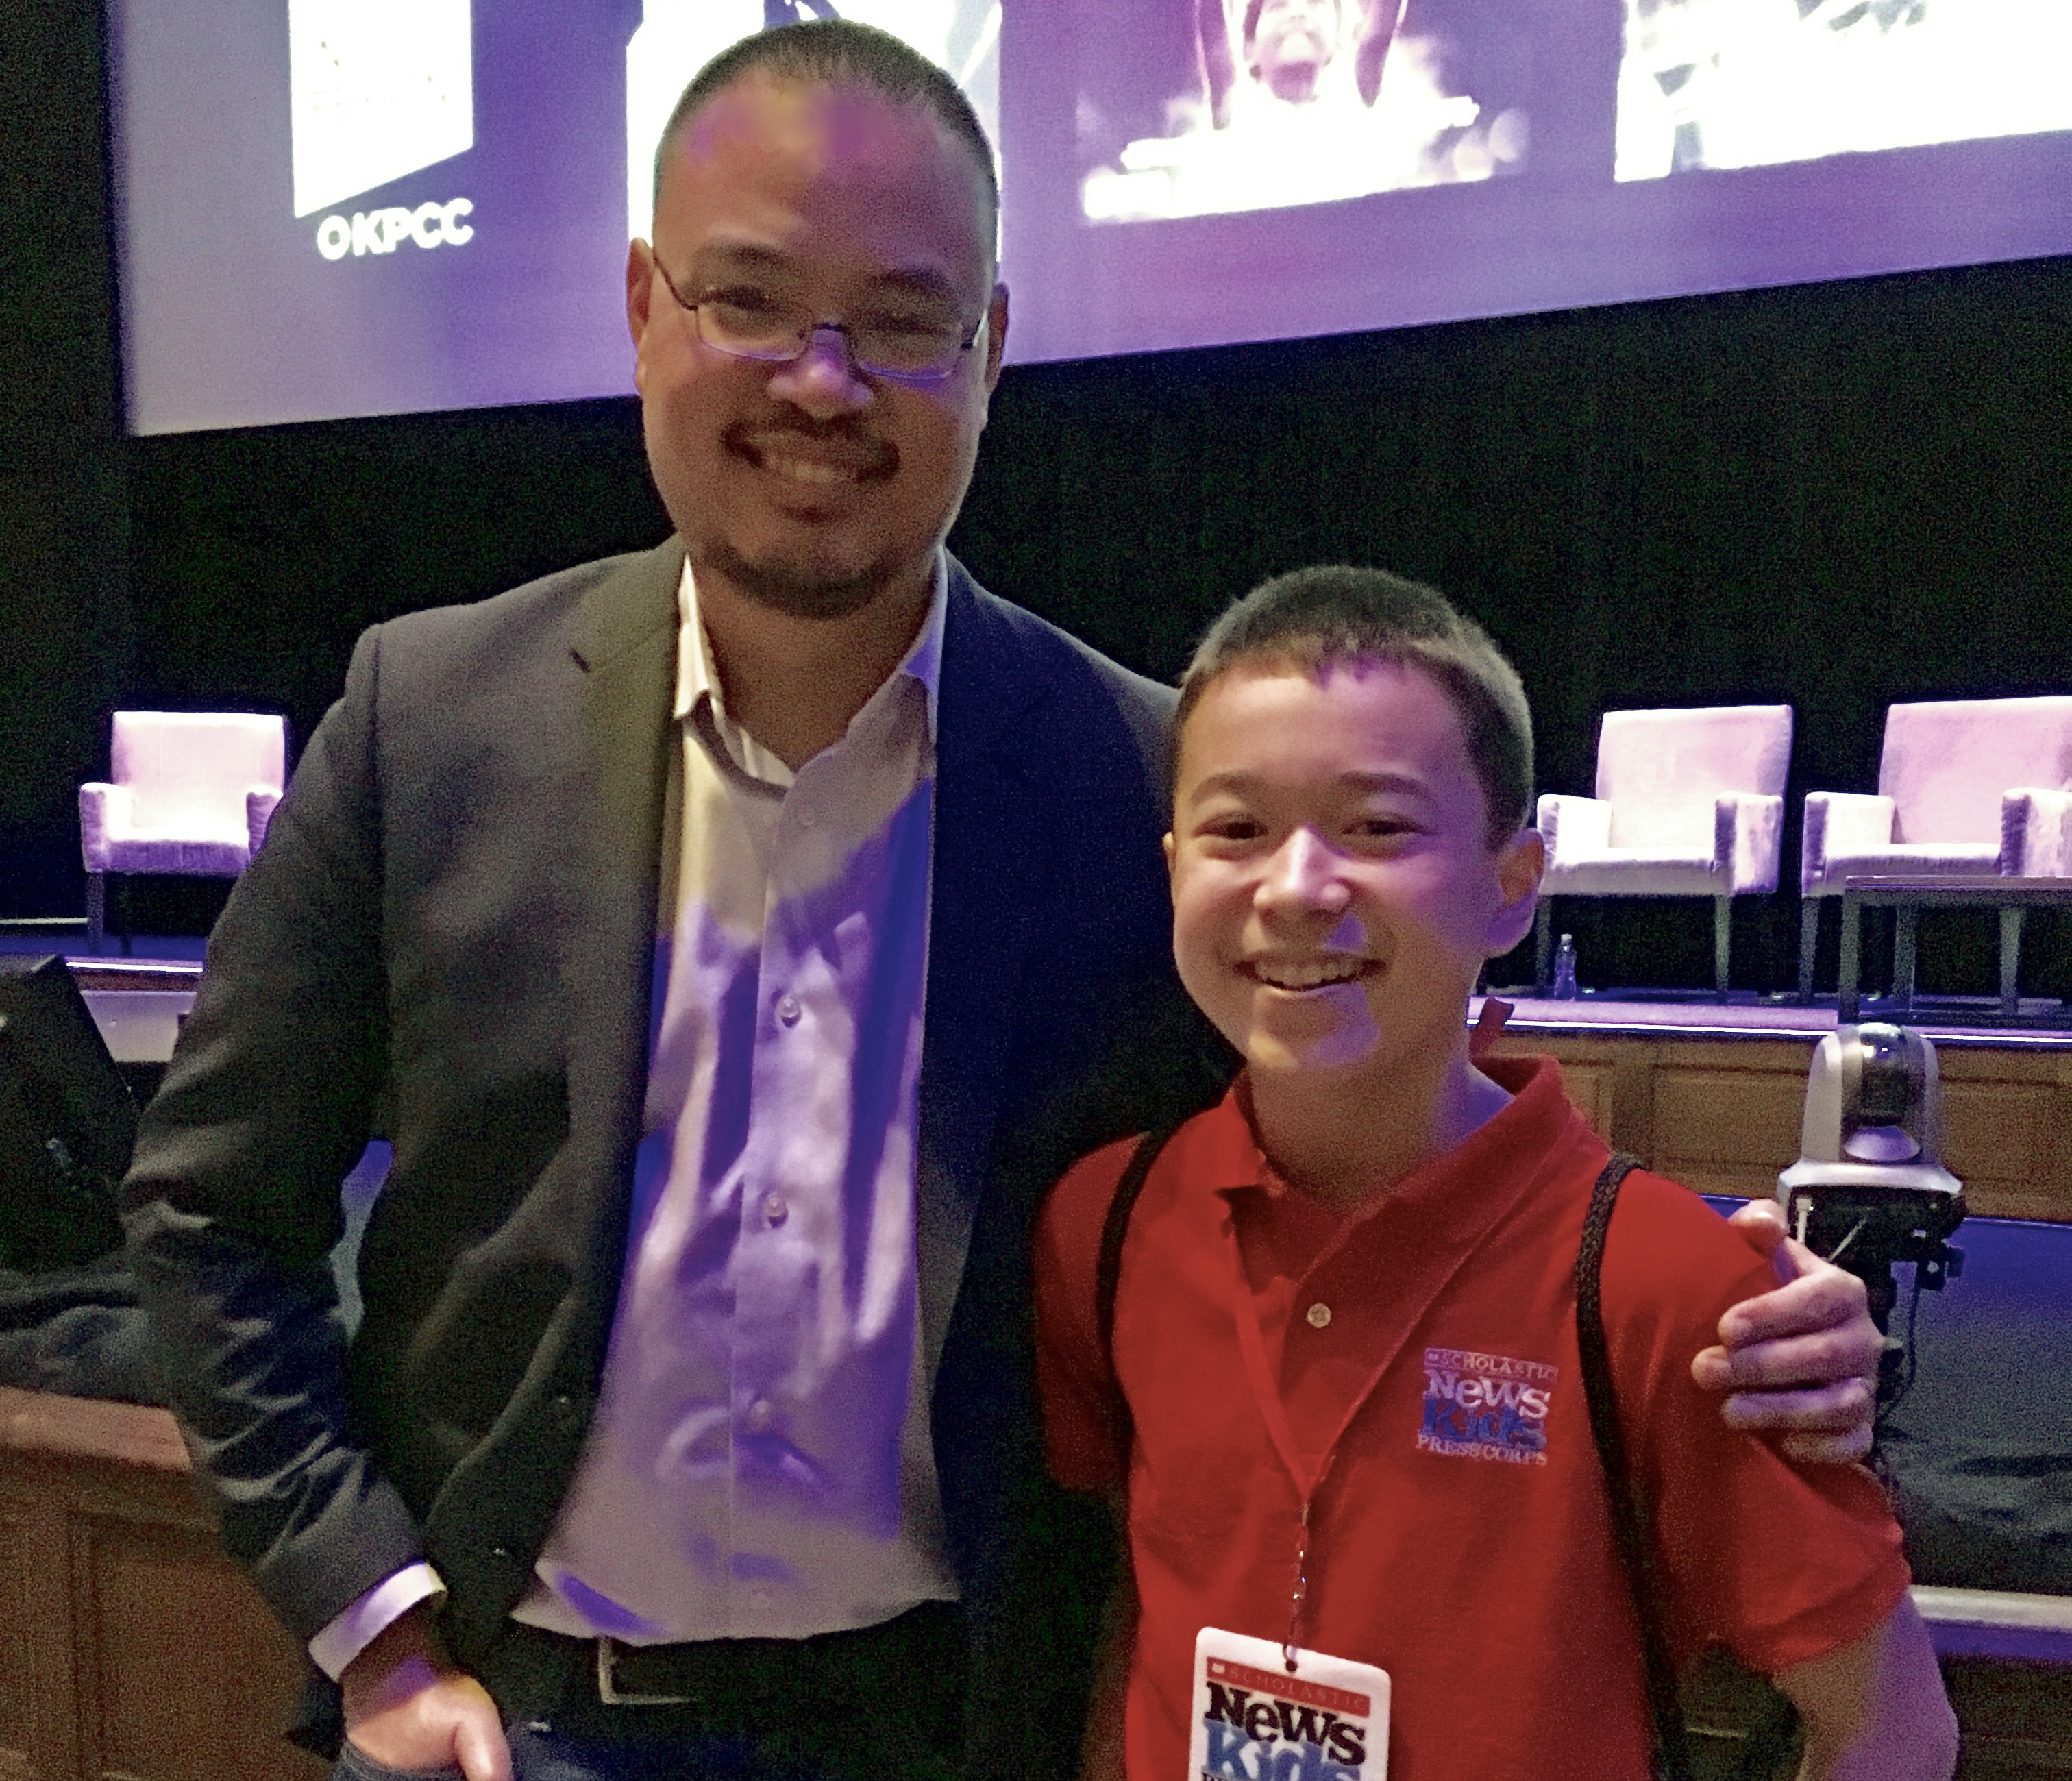 Max with Justin Chang, KPCC and LA Times film critic at the Theater at the Ace Hotel in Downtown Los Angeles